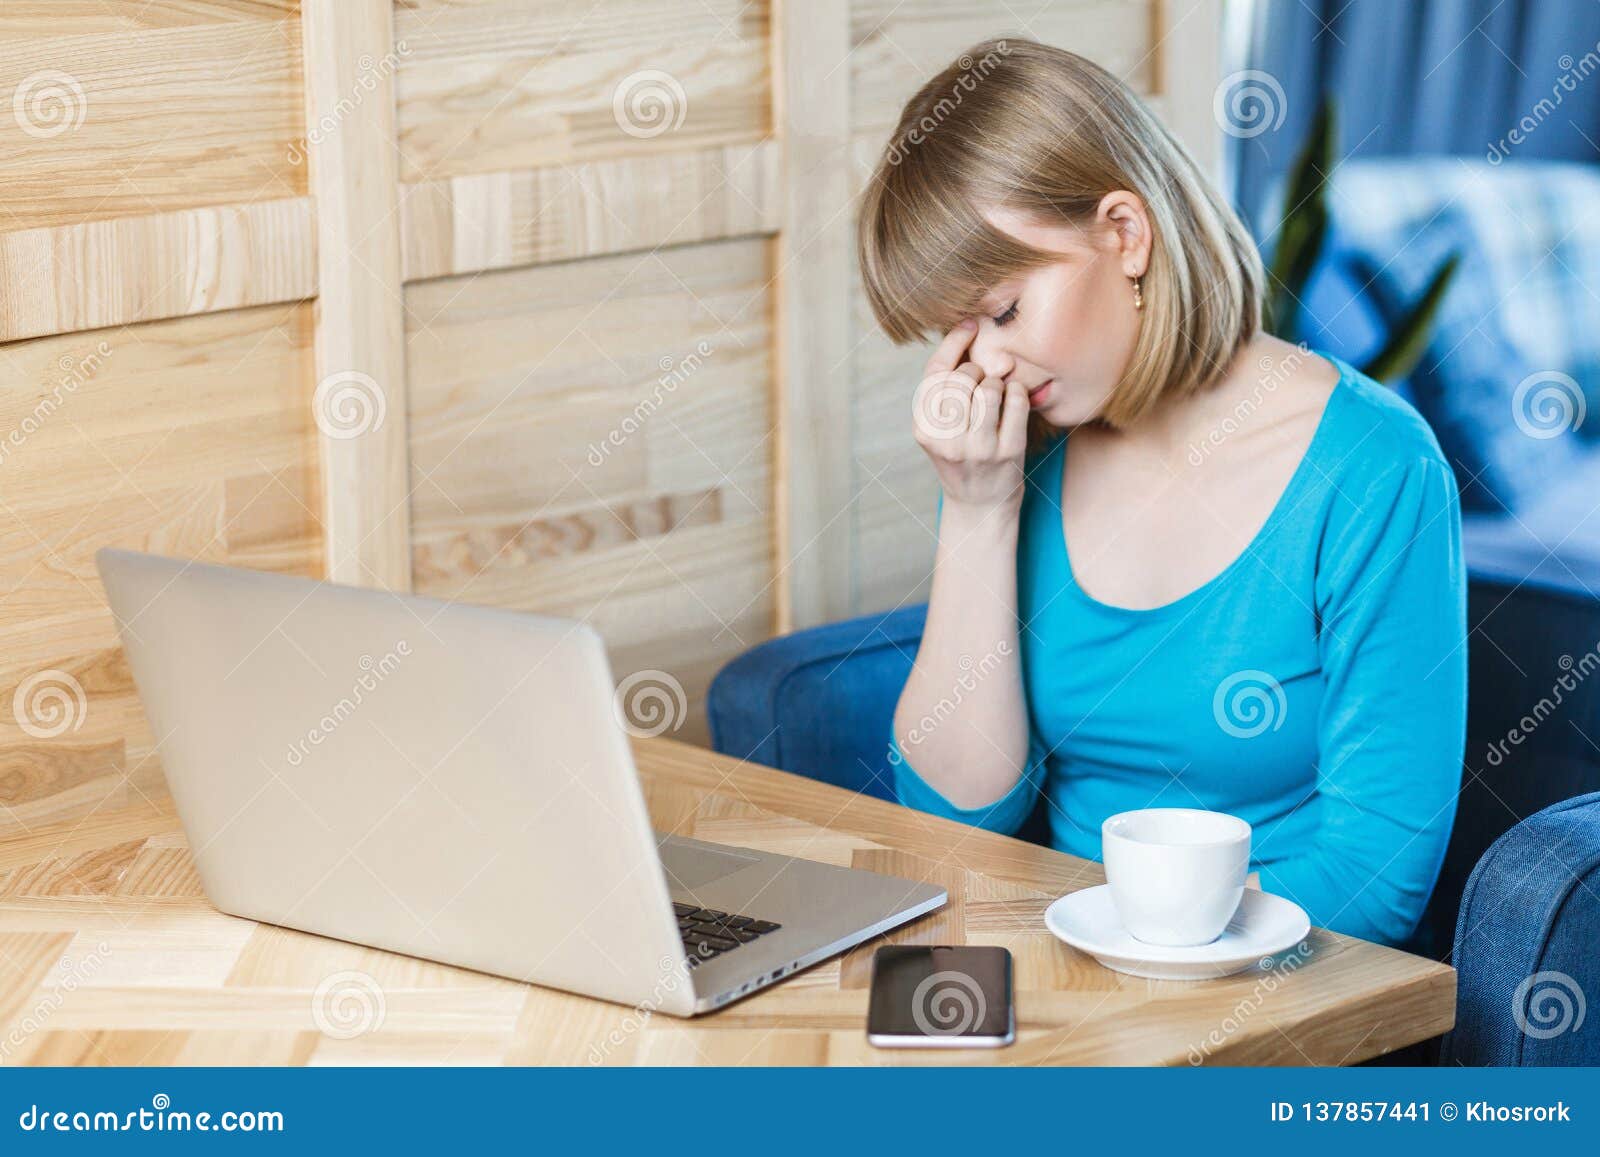 Side View Portrait Of Sad Young Girl Freelancer With Blonde Bob